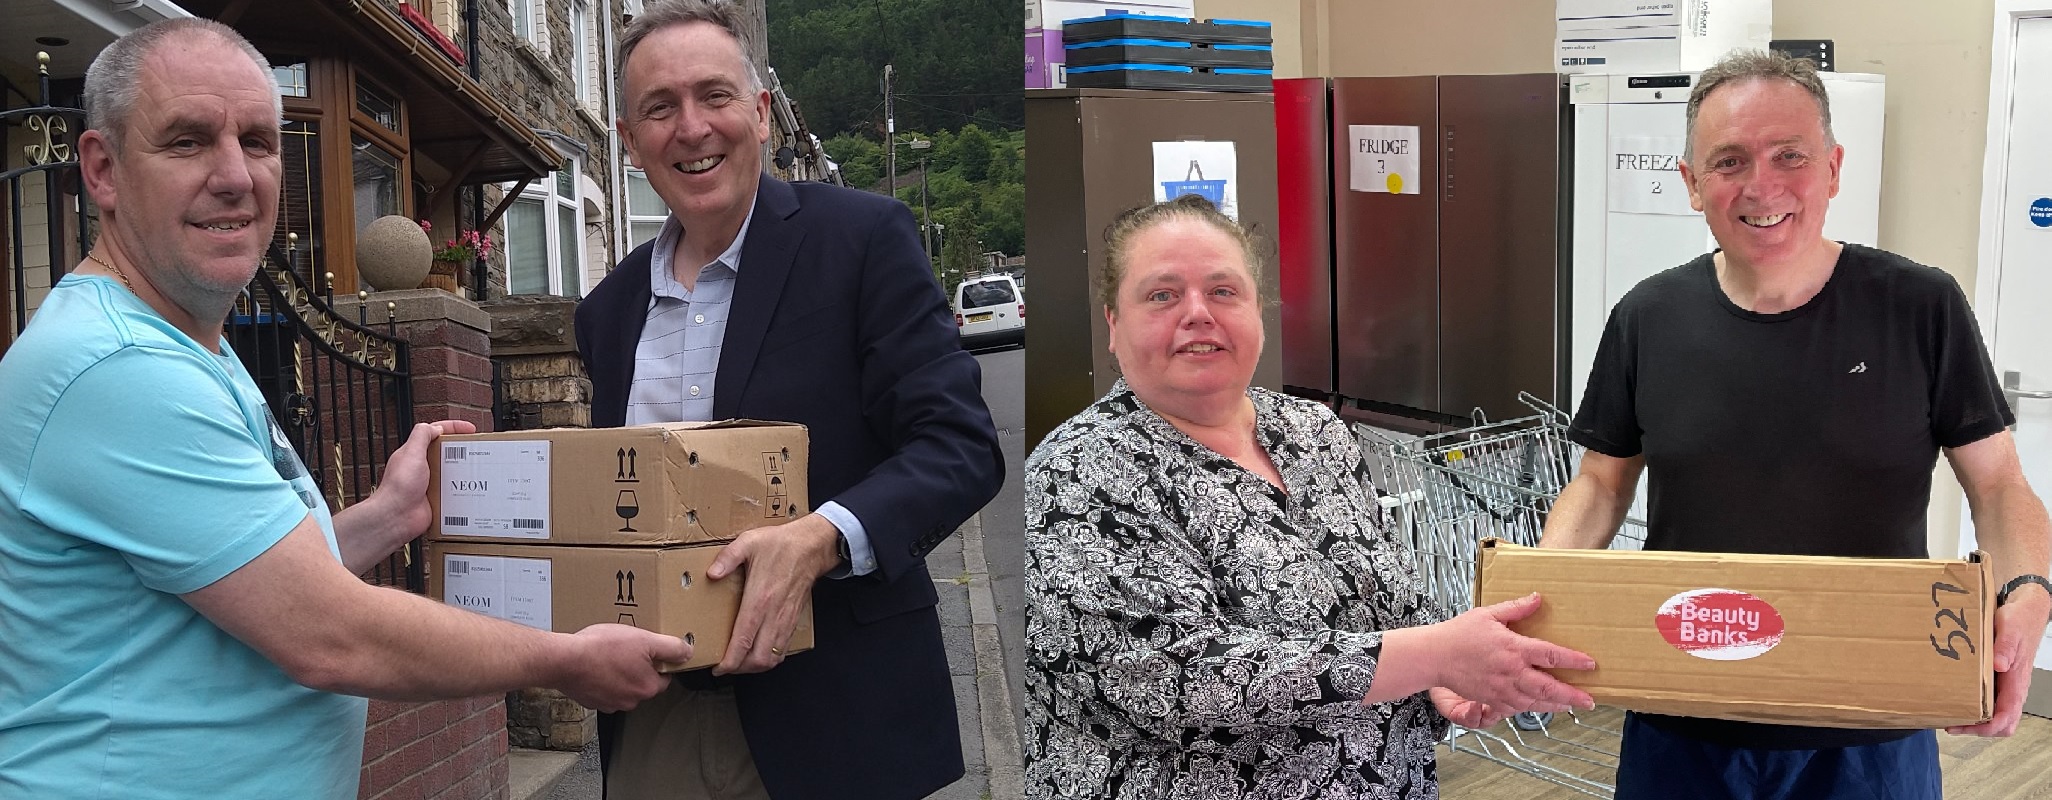 Nick Smith MP dropping off personal care and hygiene items to local Foodbanks